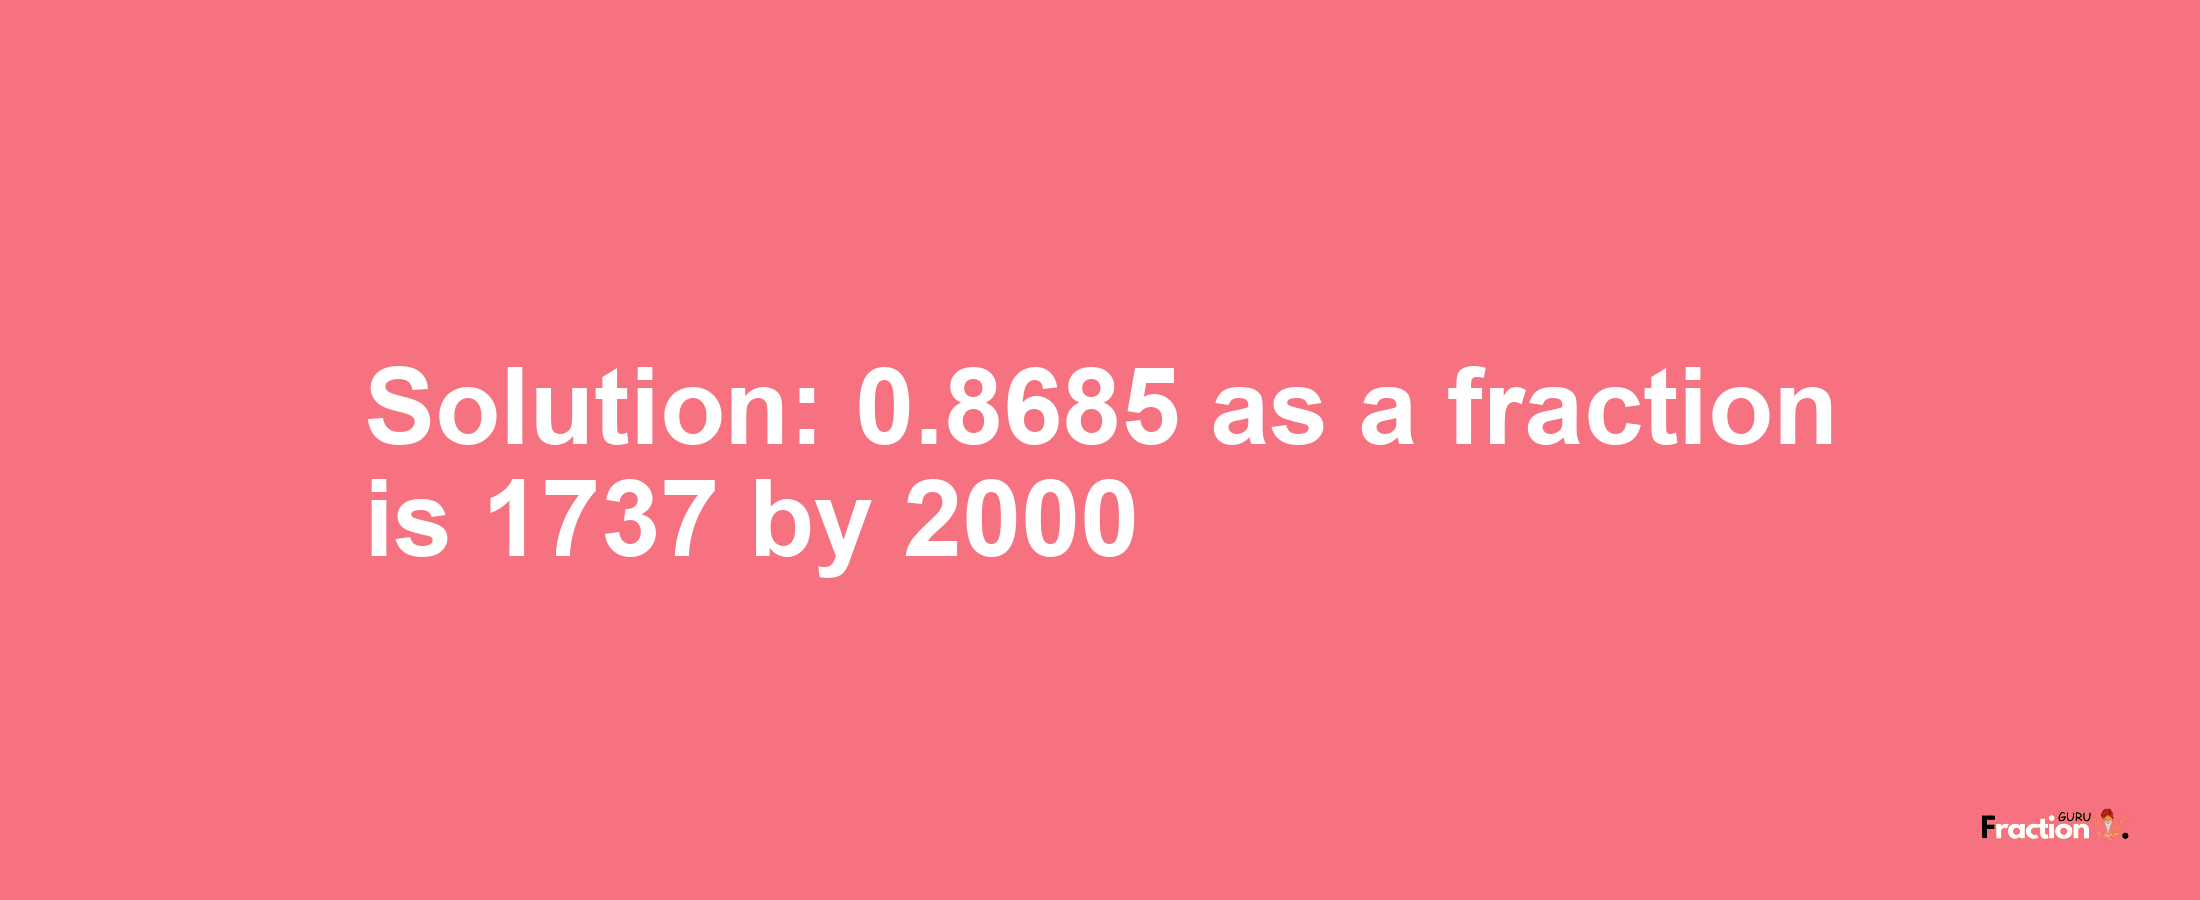 Solution:0.8685 as a fraction is 1737/2000